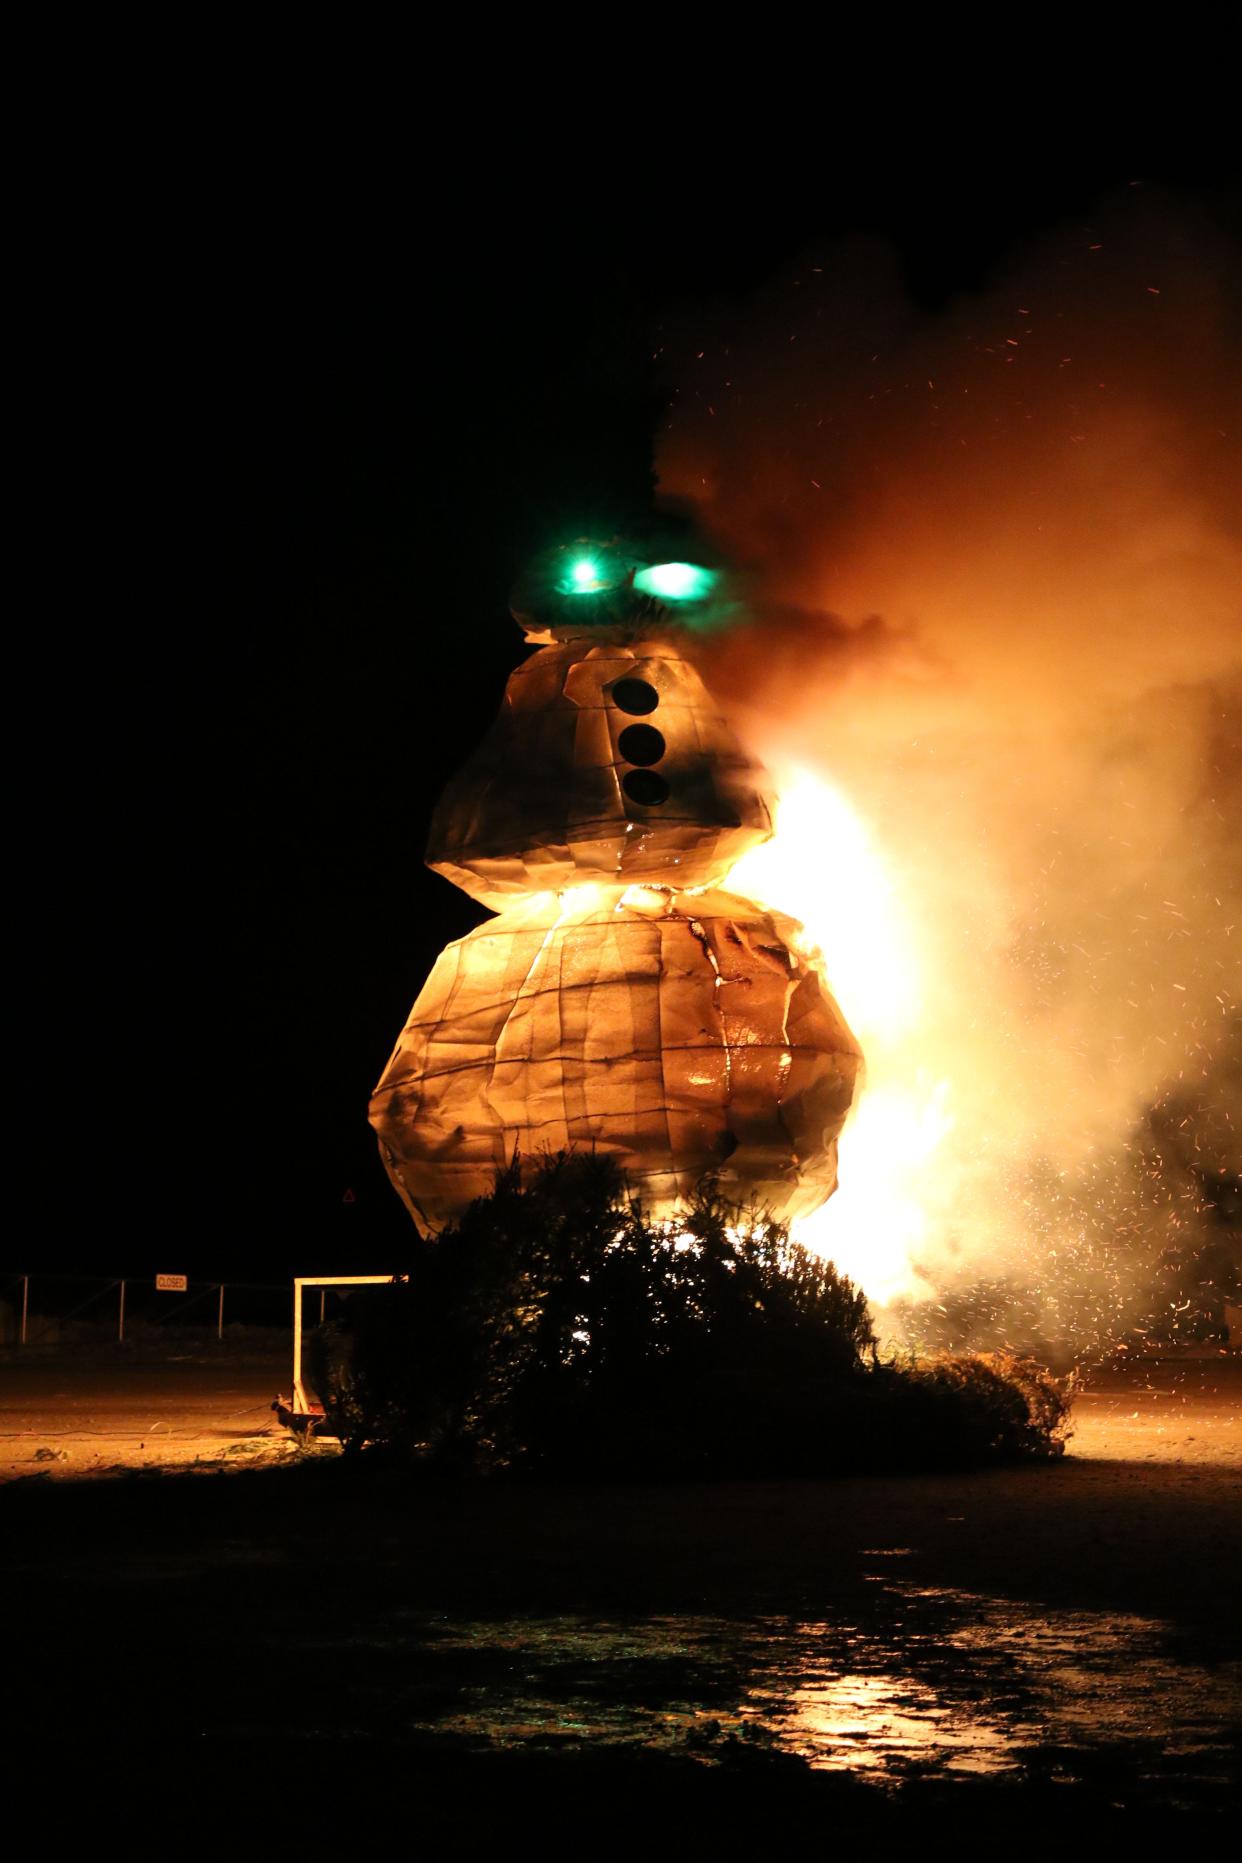 The Burning Snowman Festival returns for 2023 at Doc's Beach House and Mr. Ed's in Port Clinton. A 25-foot snowman will be ready when the festival is held Feb. 25. This snowman, named Tim, burned in 2020 at Waterworks Park.